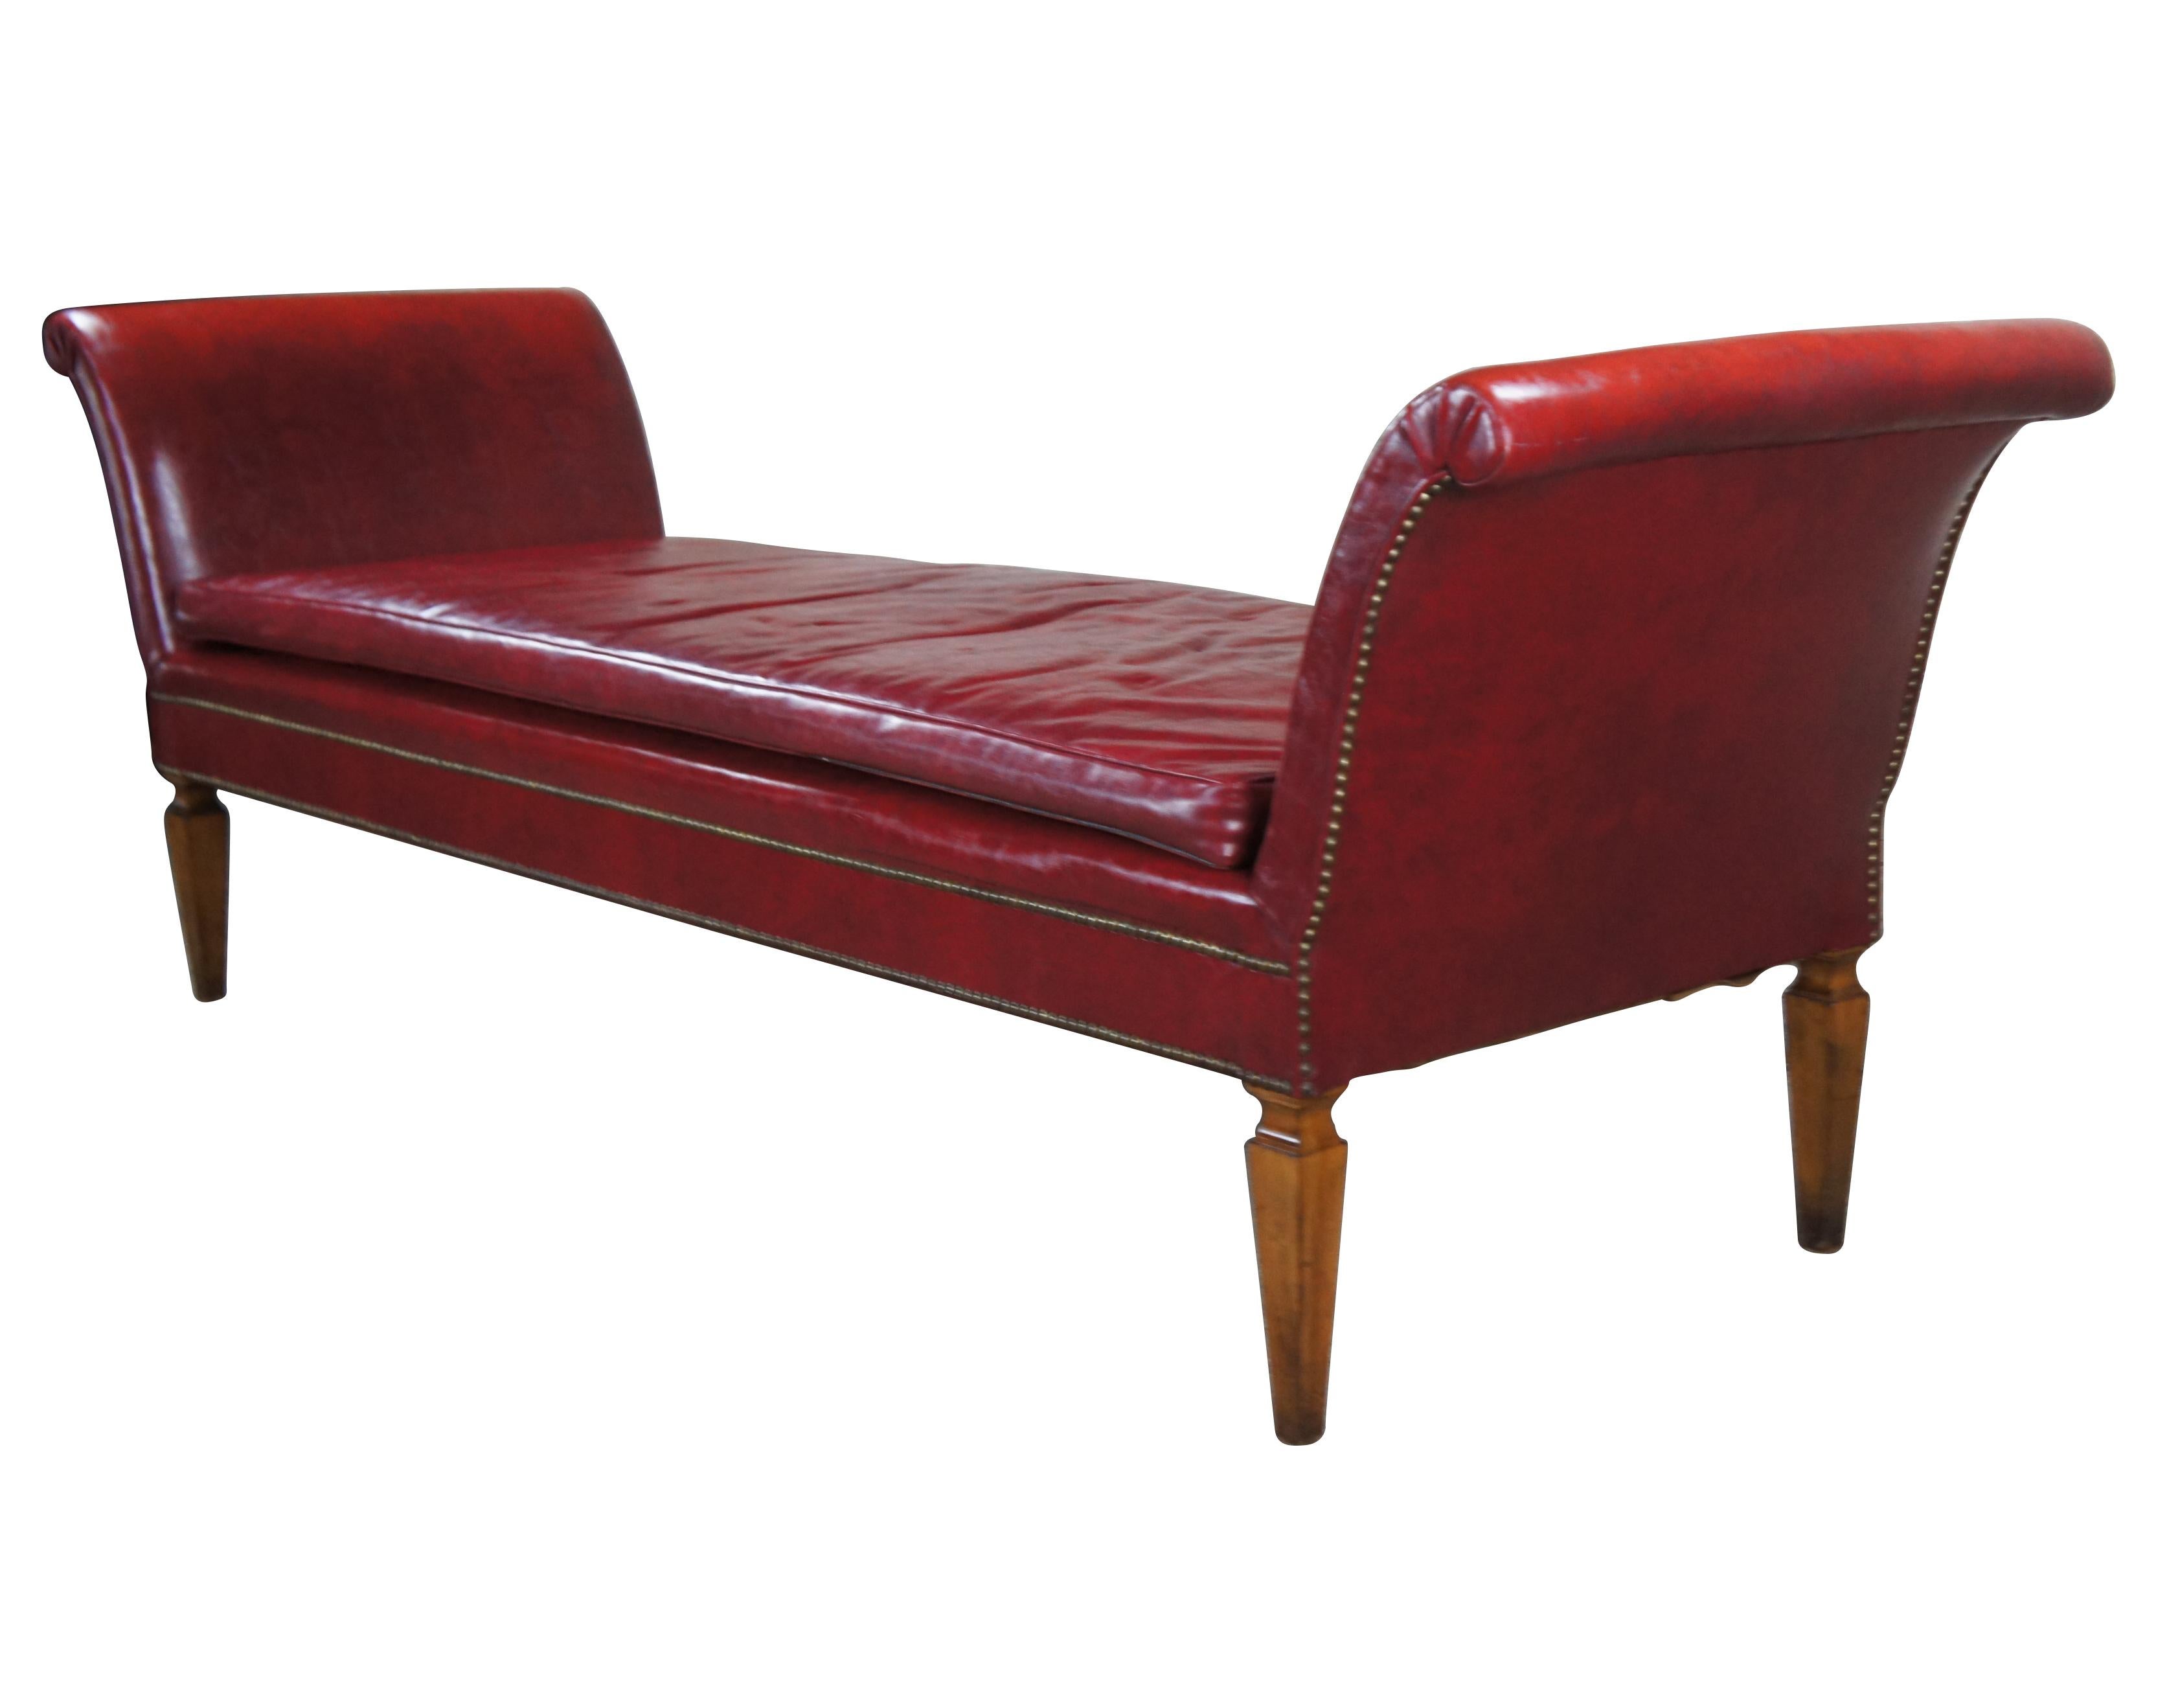 Large Mid-20th Century Chaise Lounge, bench or daybed. Features a long red leather upholstered frame with flared and scrolled arms over square tapered mahogany feet. Includes nailhead trim.